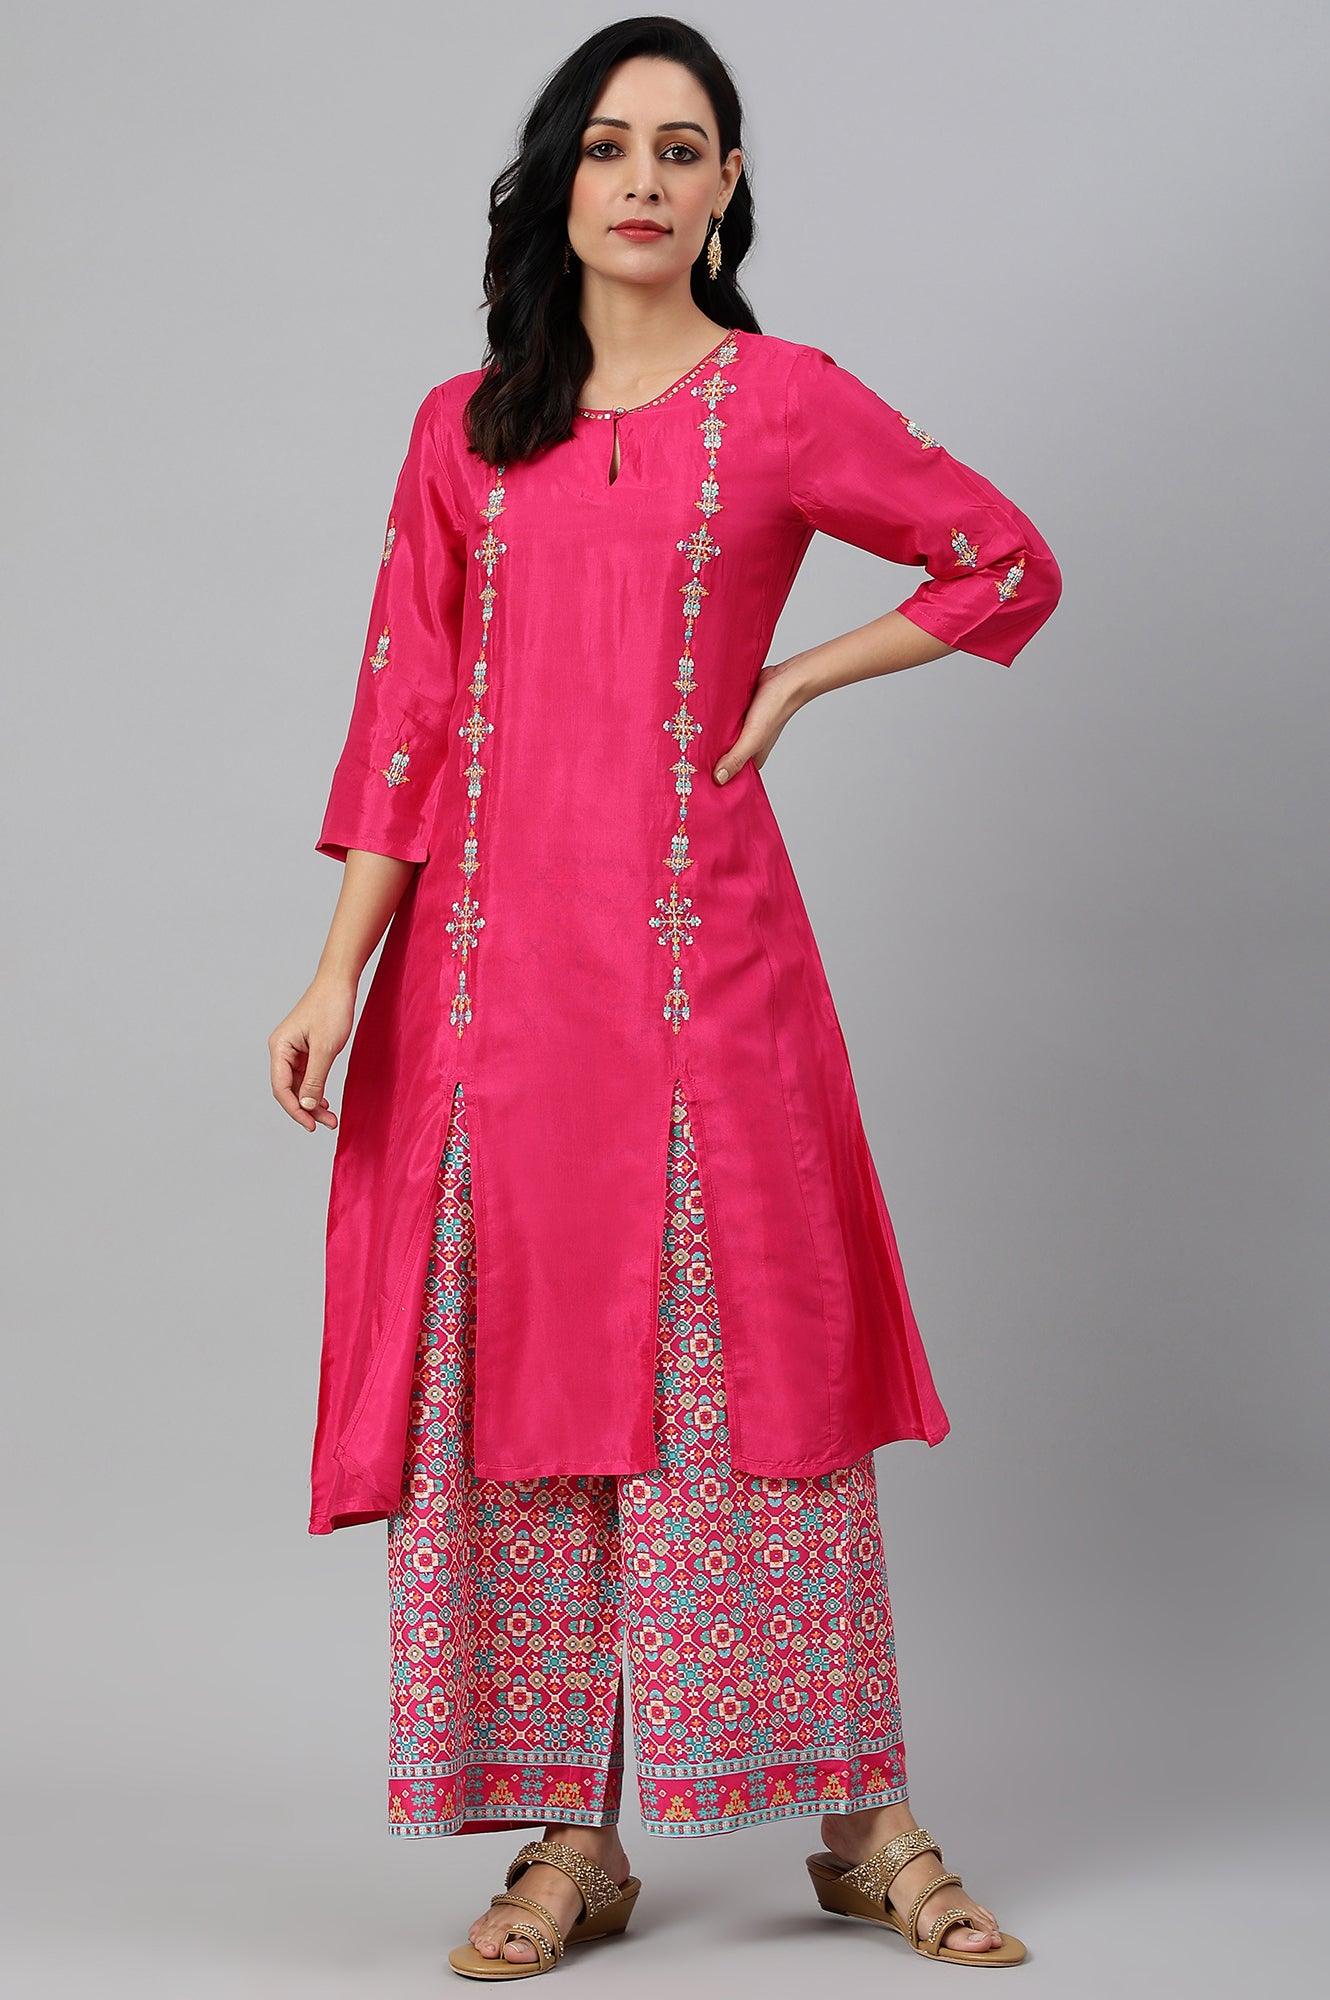 Bright Multicoloured Embroidered kurta With Front Slits - wforwoman